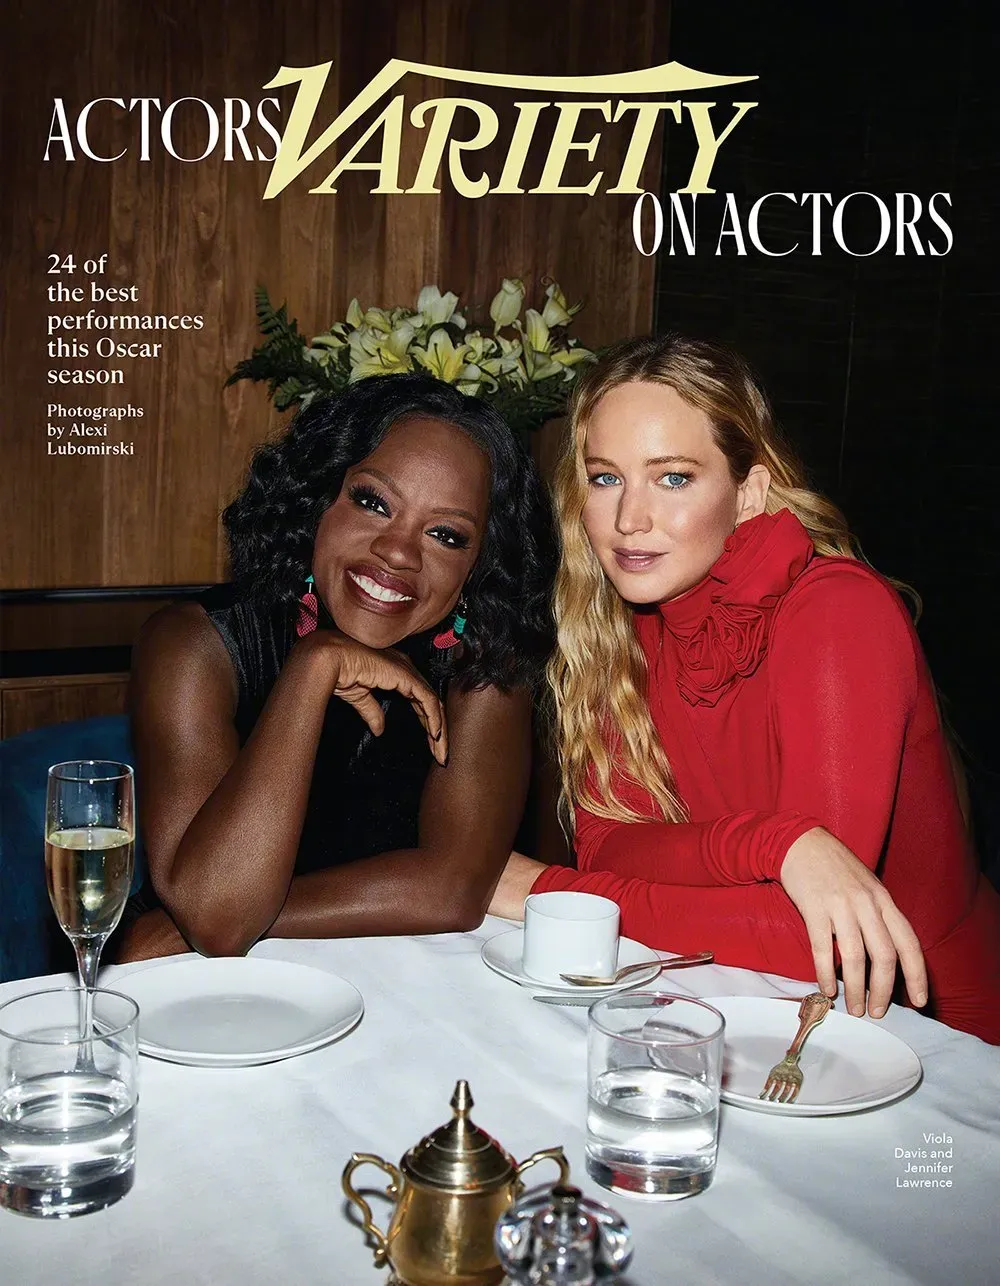 'Variety' magazine's 'Actors ON Actors' session cover | FMV6